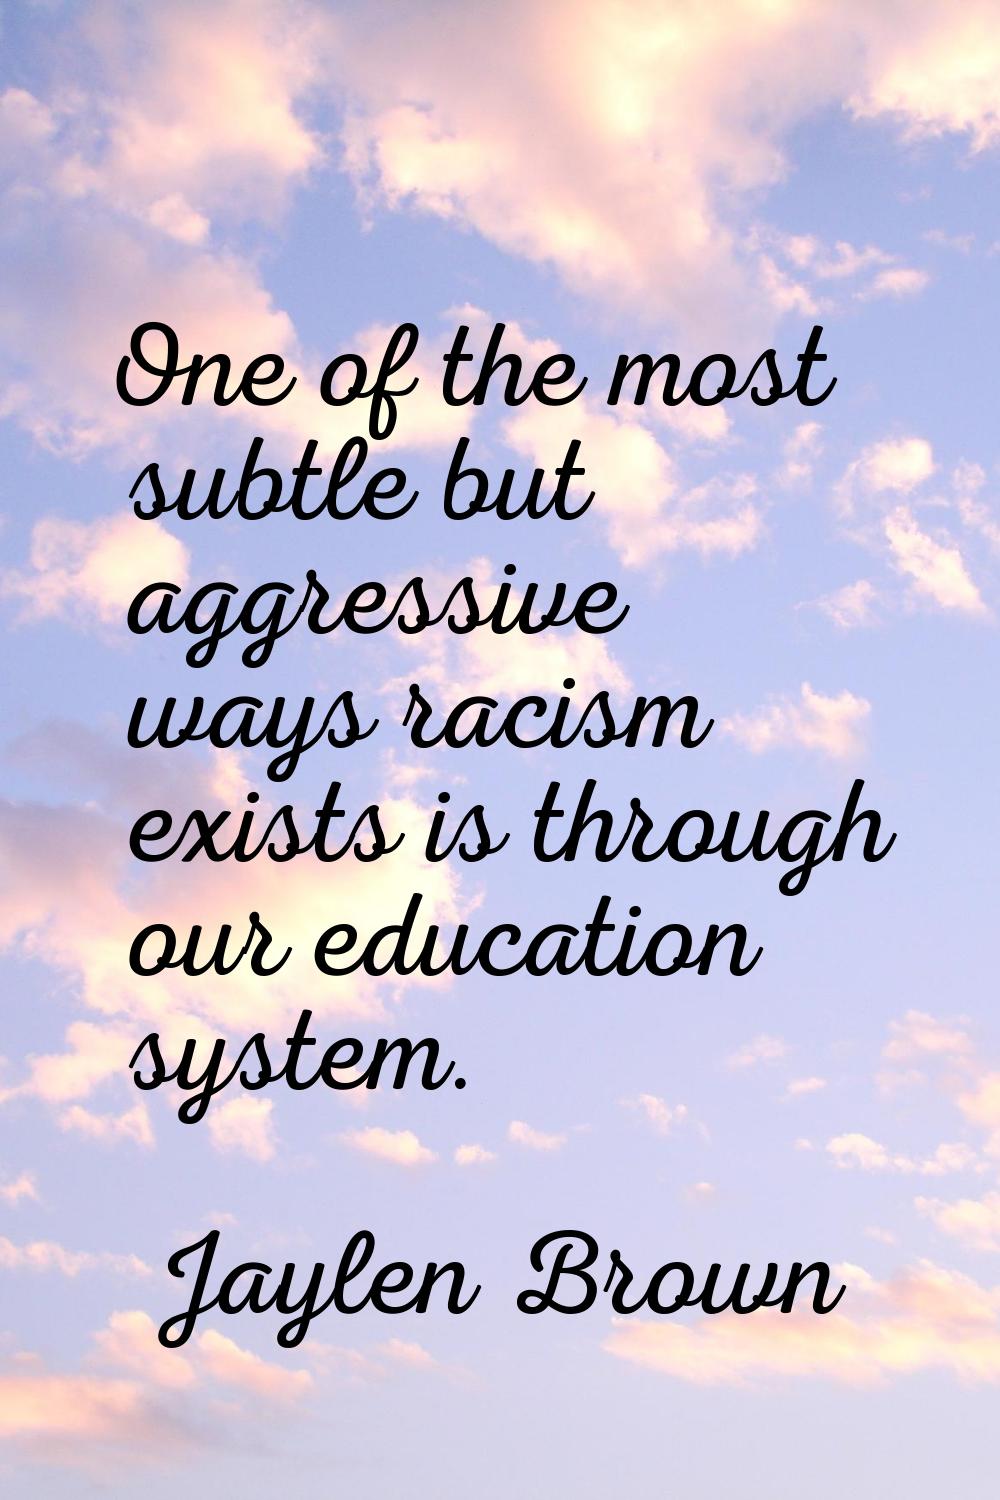 One of the most subtle but aggressive ways racism exists is through our education system.